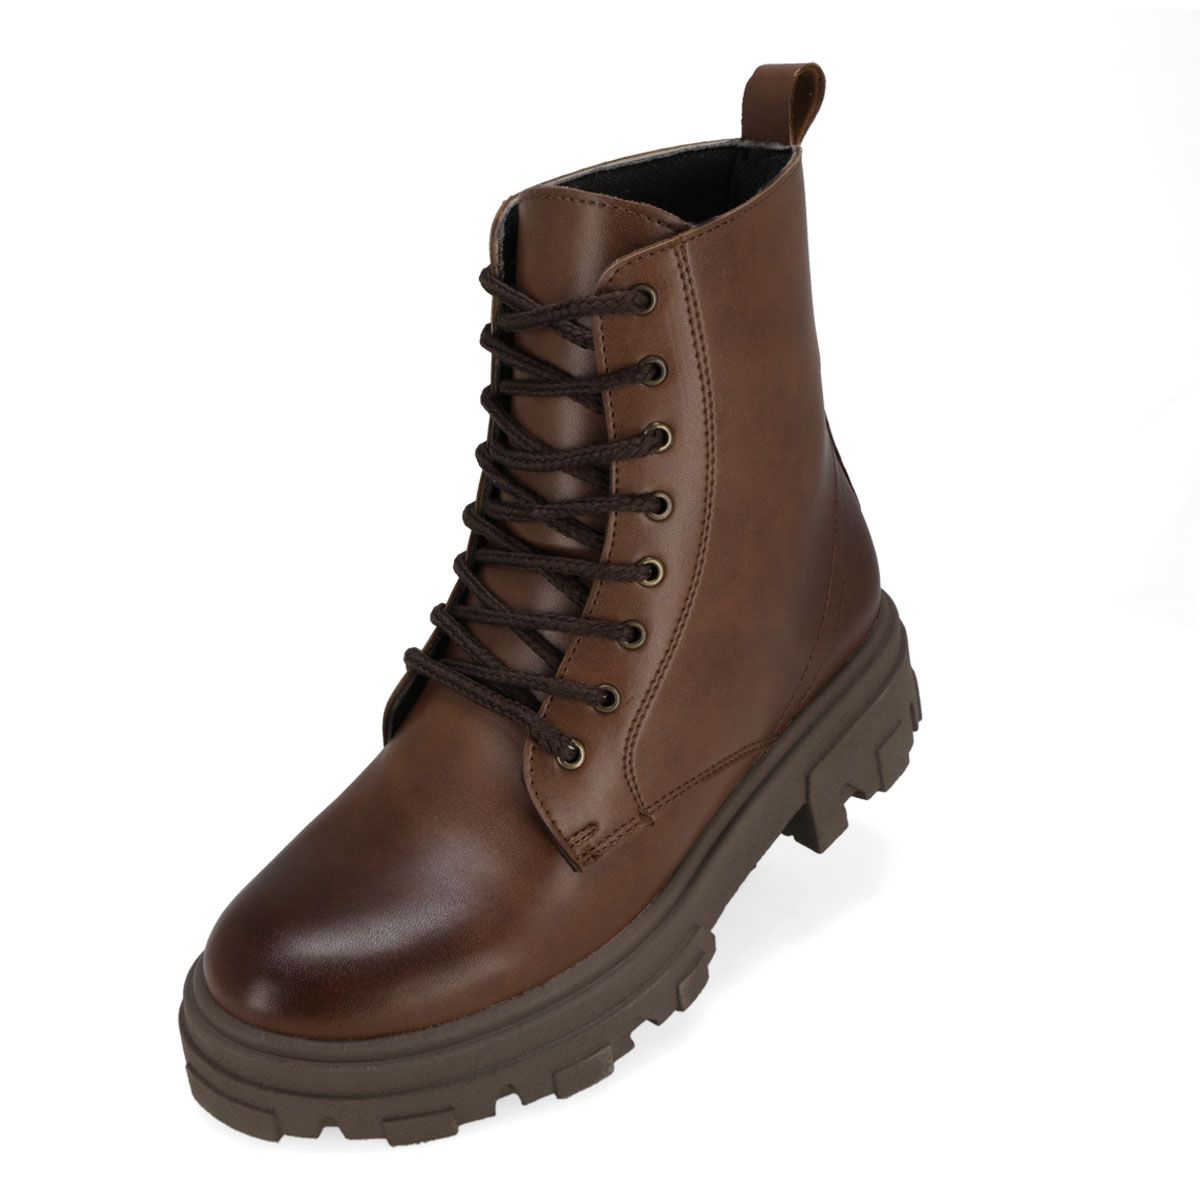 BOTA CASUAL MUJER EXESSO 1633 WHISKY